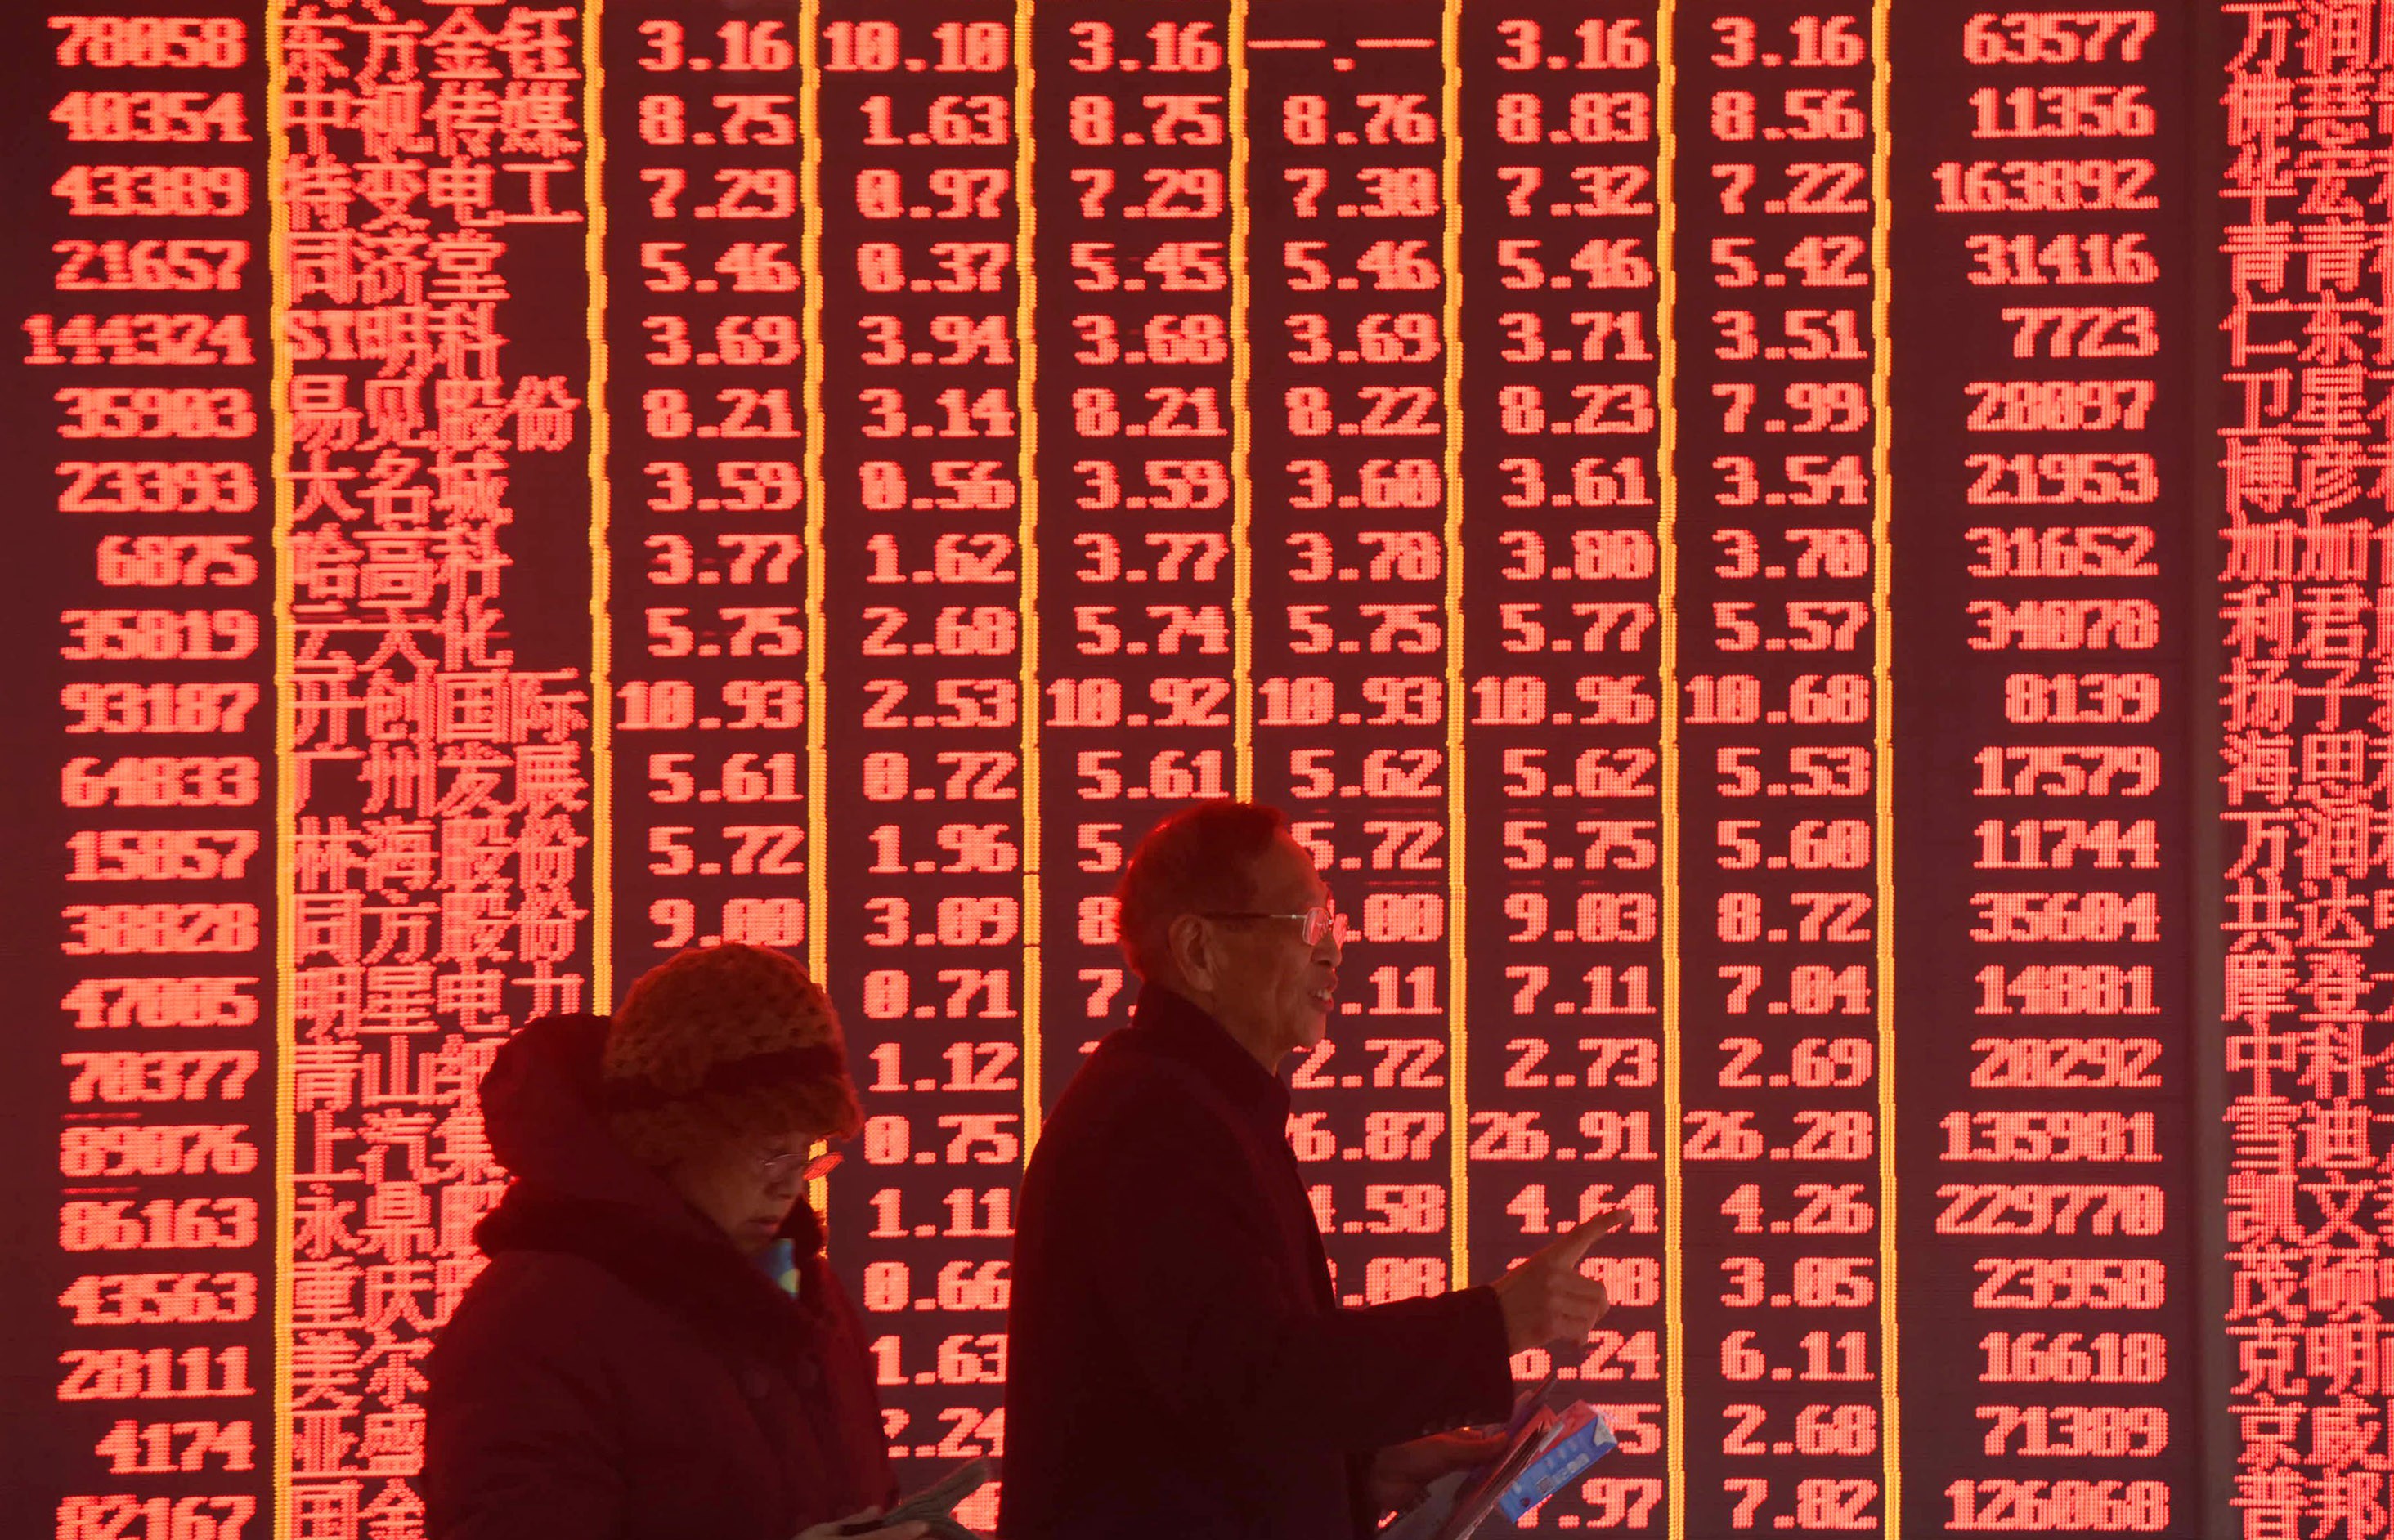 Investors are seen at a stock exchange in Hangzhou, east China’s Zhejiang province on February 11, 2019, the first trading day of the Year of the Pig. Photo: Xinhua